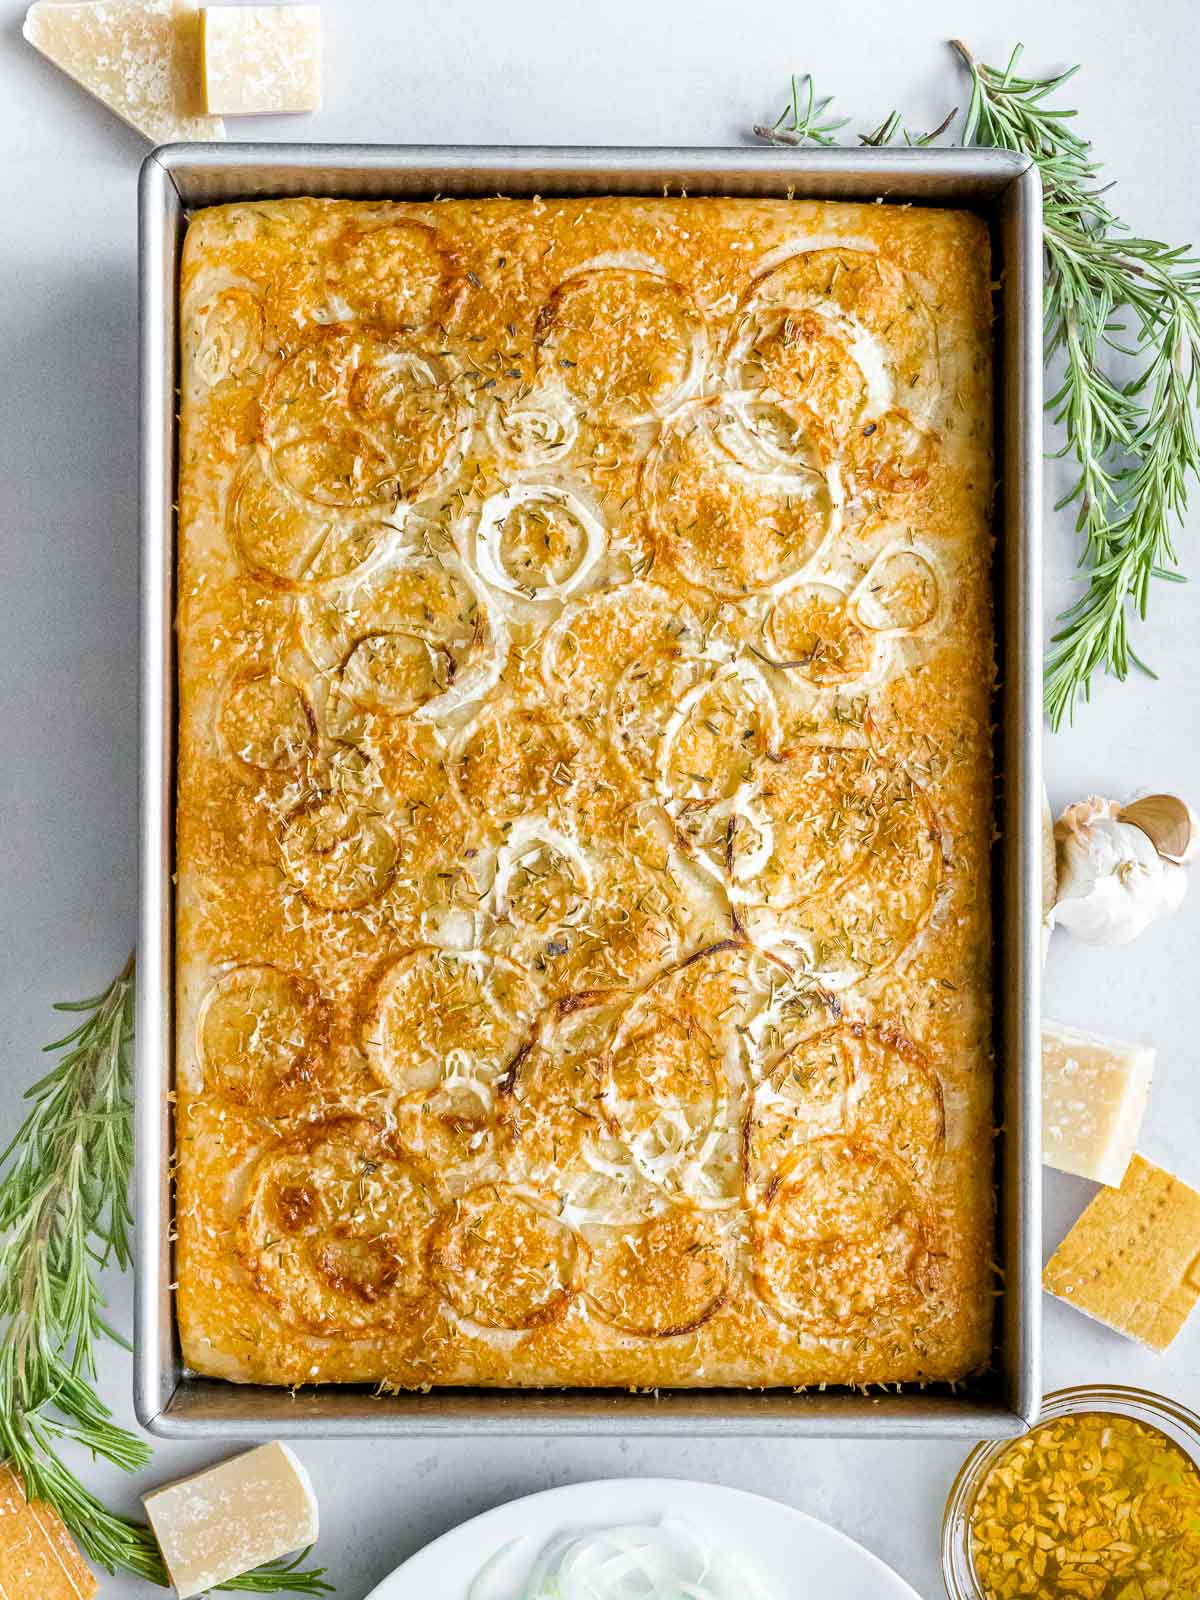 sourdough focaccia bread with rosemary, onions, and parmesan cheese in a baking pan